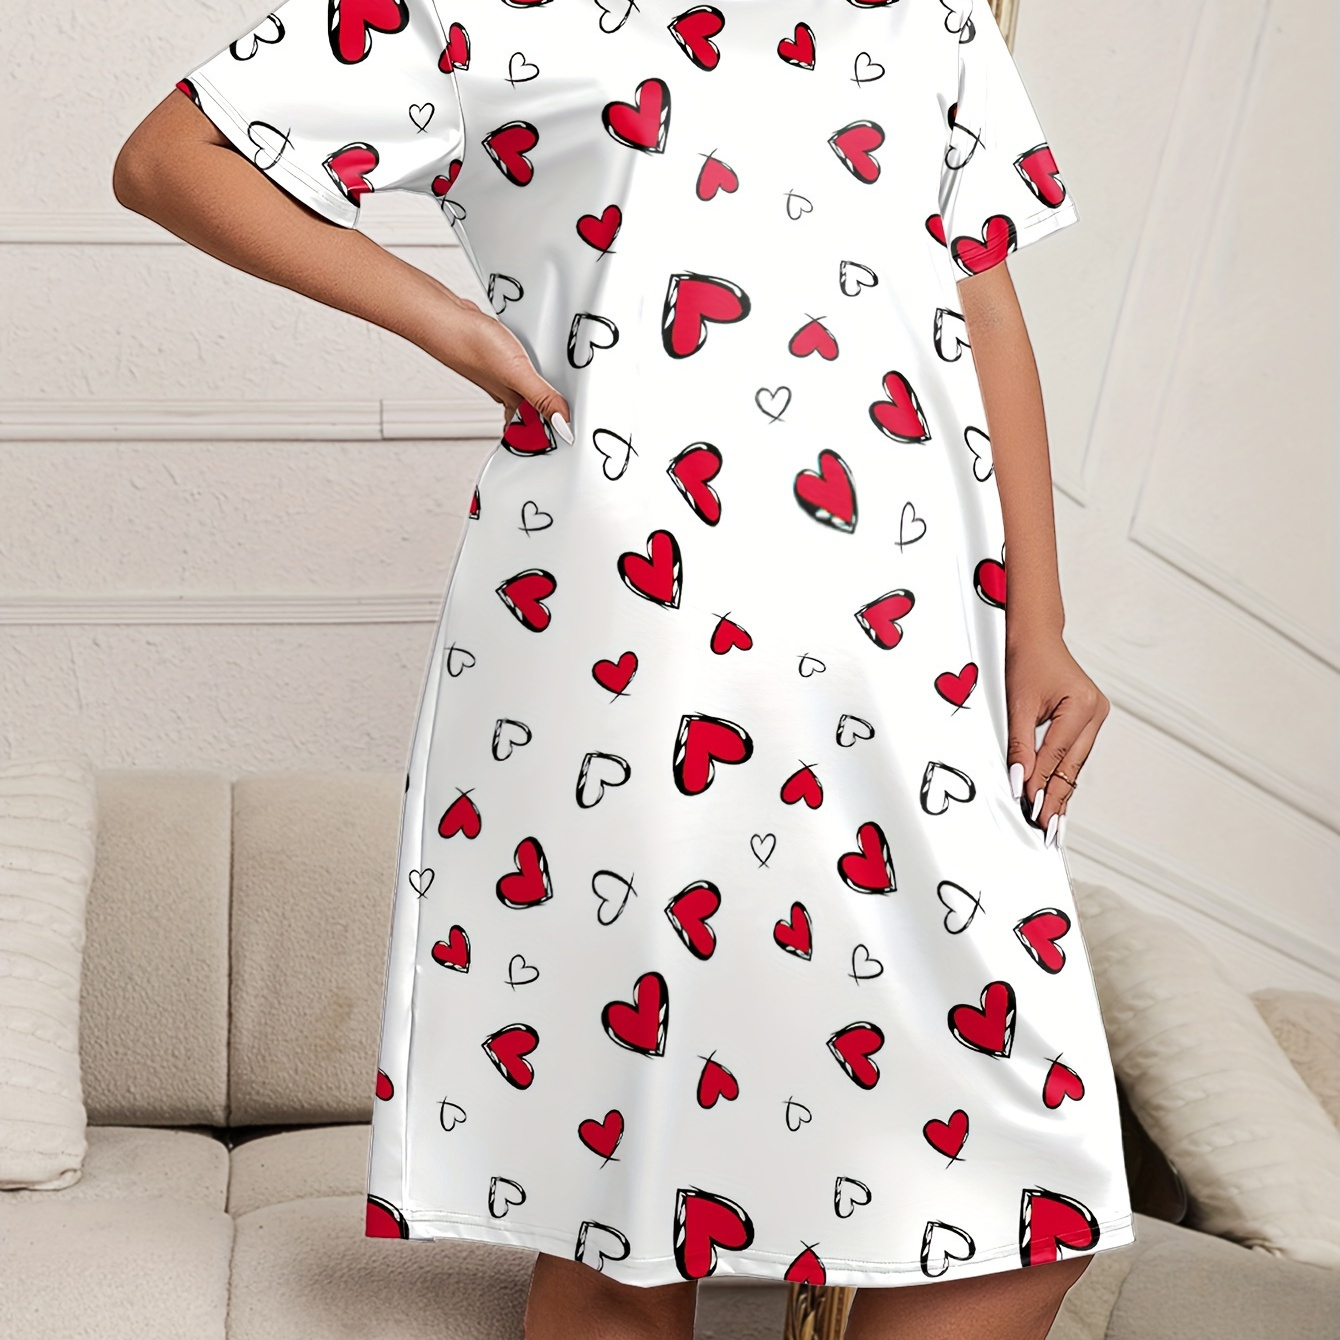 

Plus Size Hearts Graphic Print, Comfy Trendy Maternity Night Dress For Pregnant Women, Gender Reveal